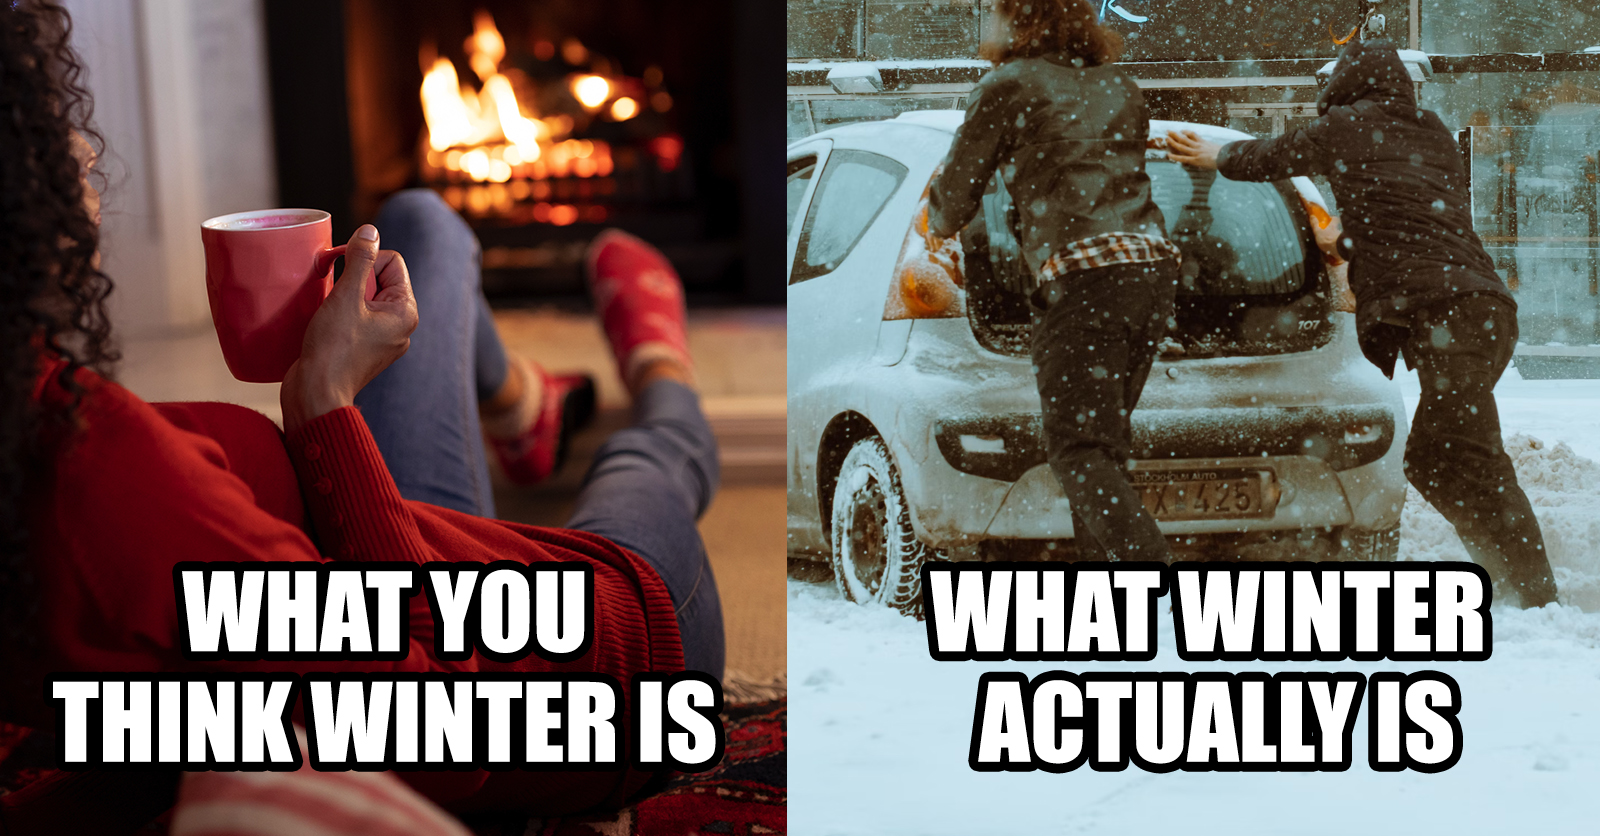 What you think winter is and what winter actually is